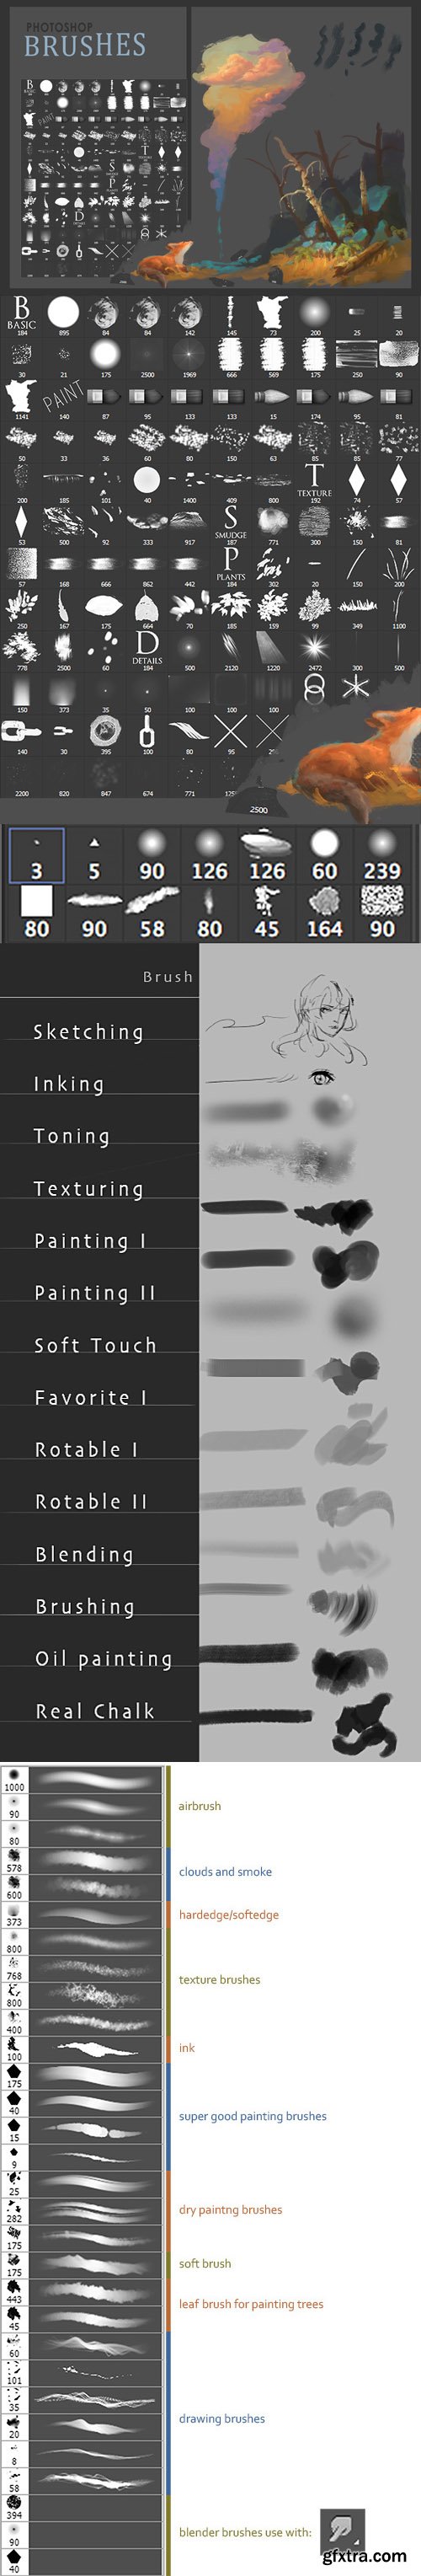 150+ Painting Brushes for Photoshop